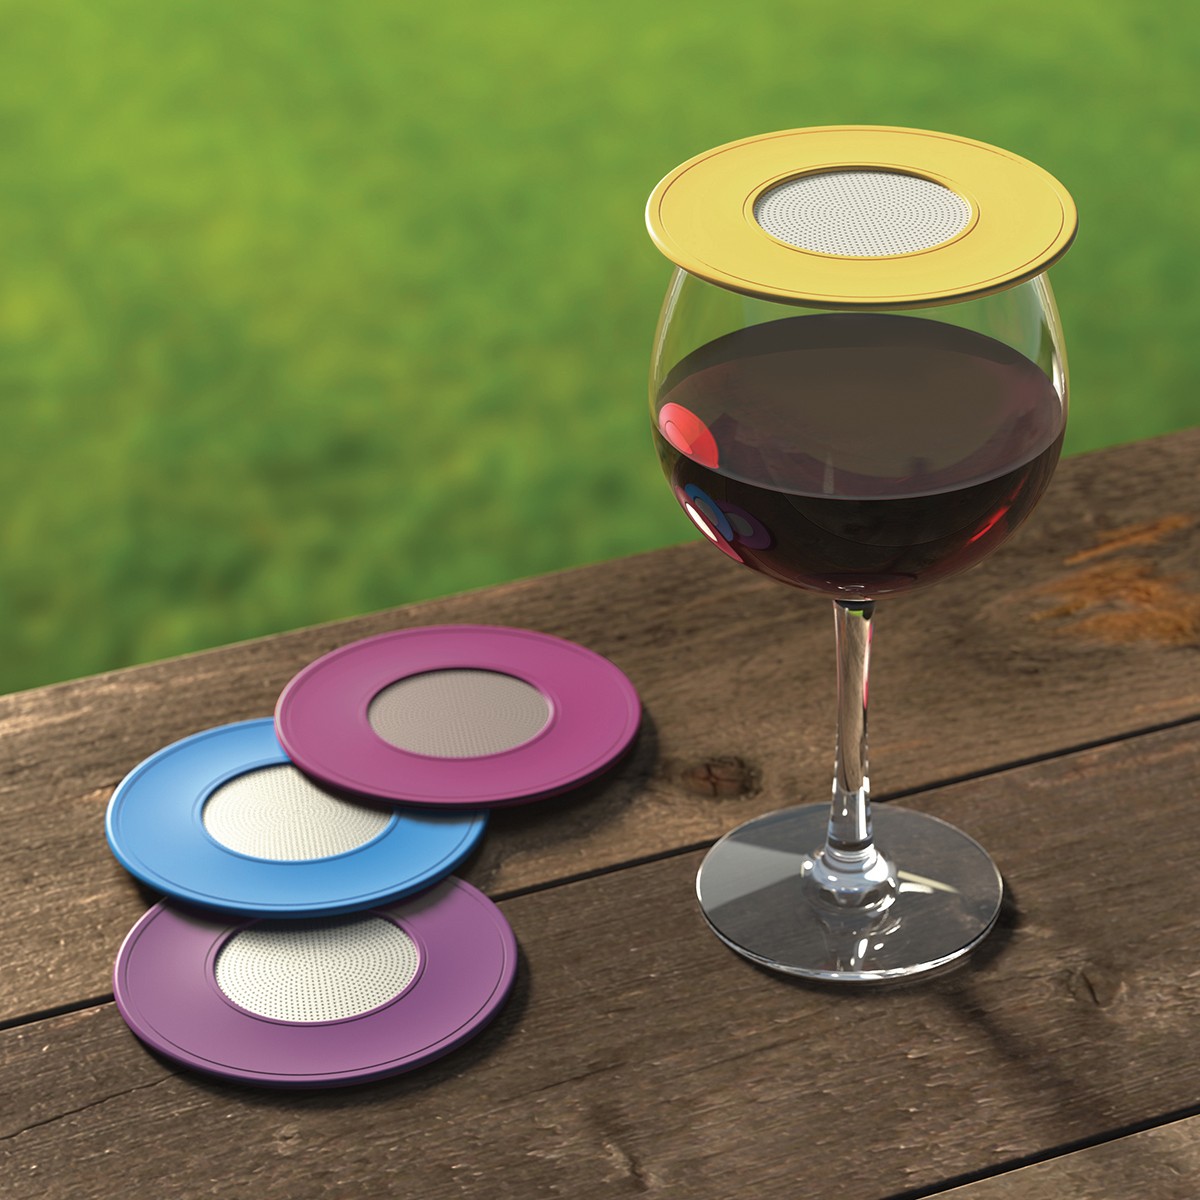 Drink Tops Ventilated Wine Glass Covers - Wine Country - 4 Pack